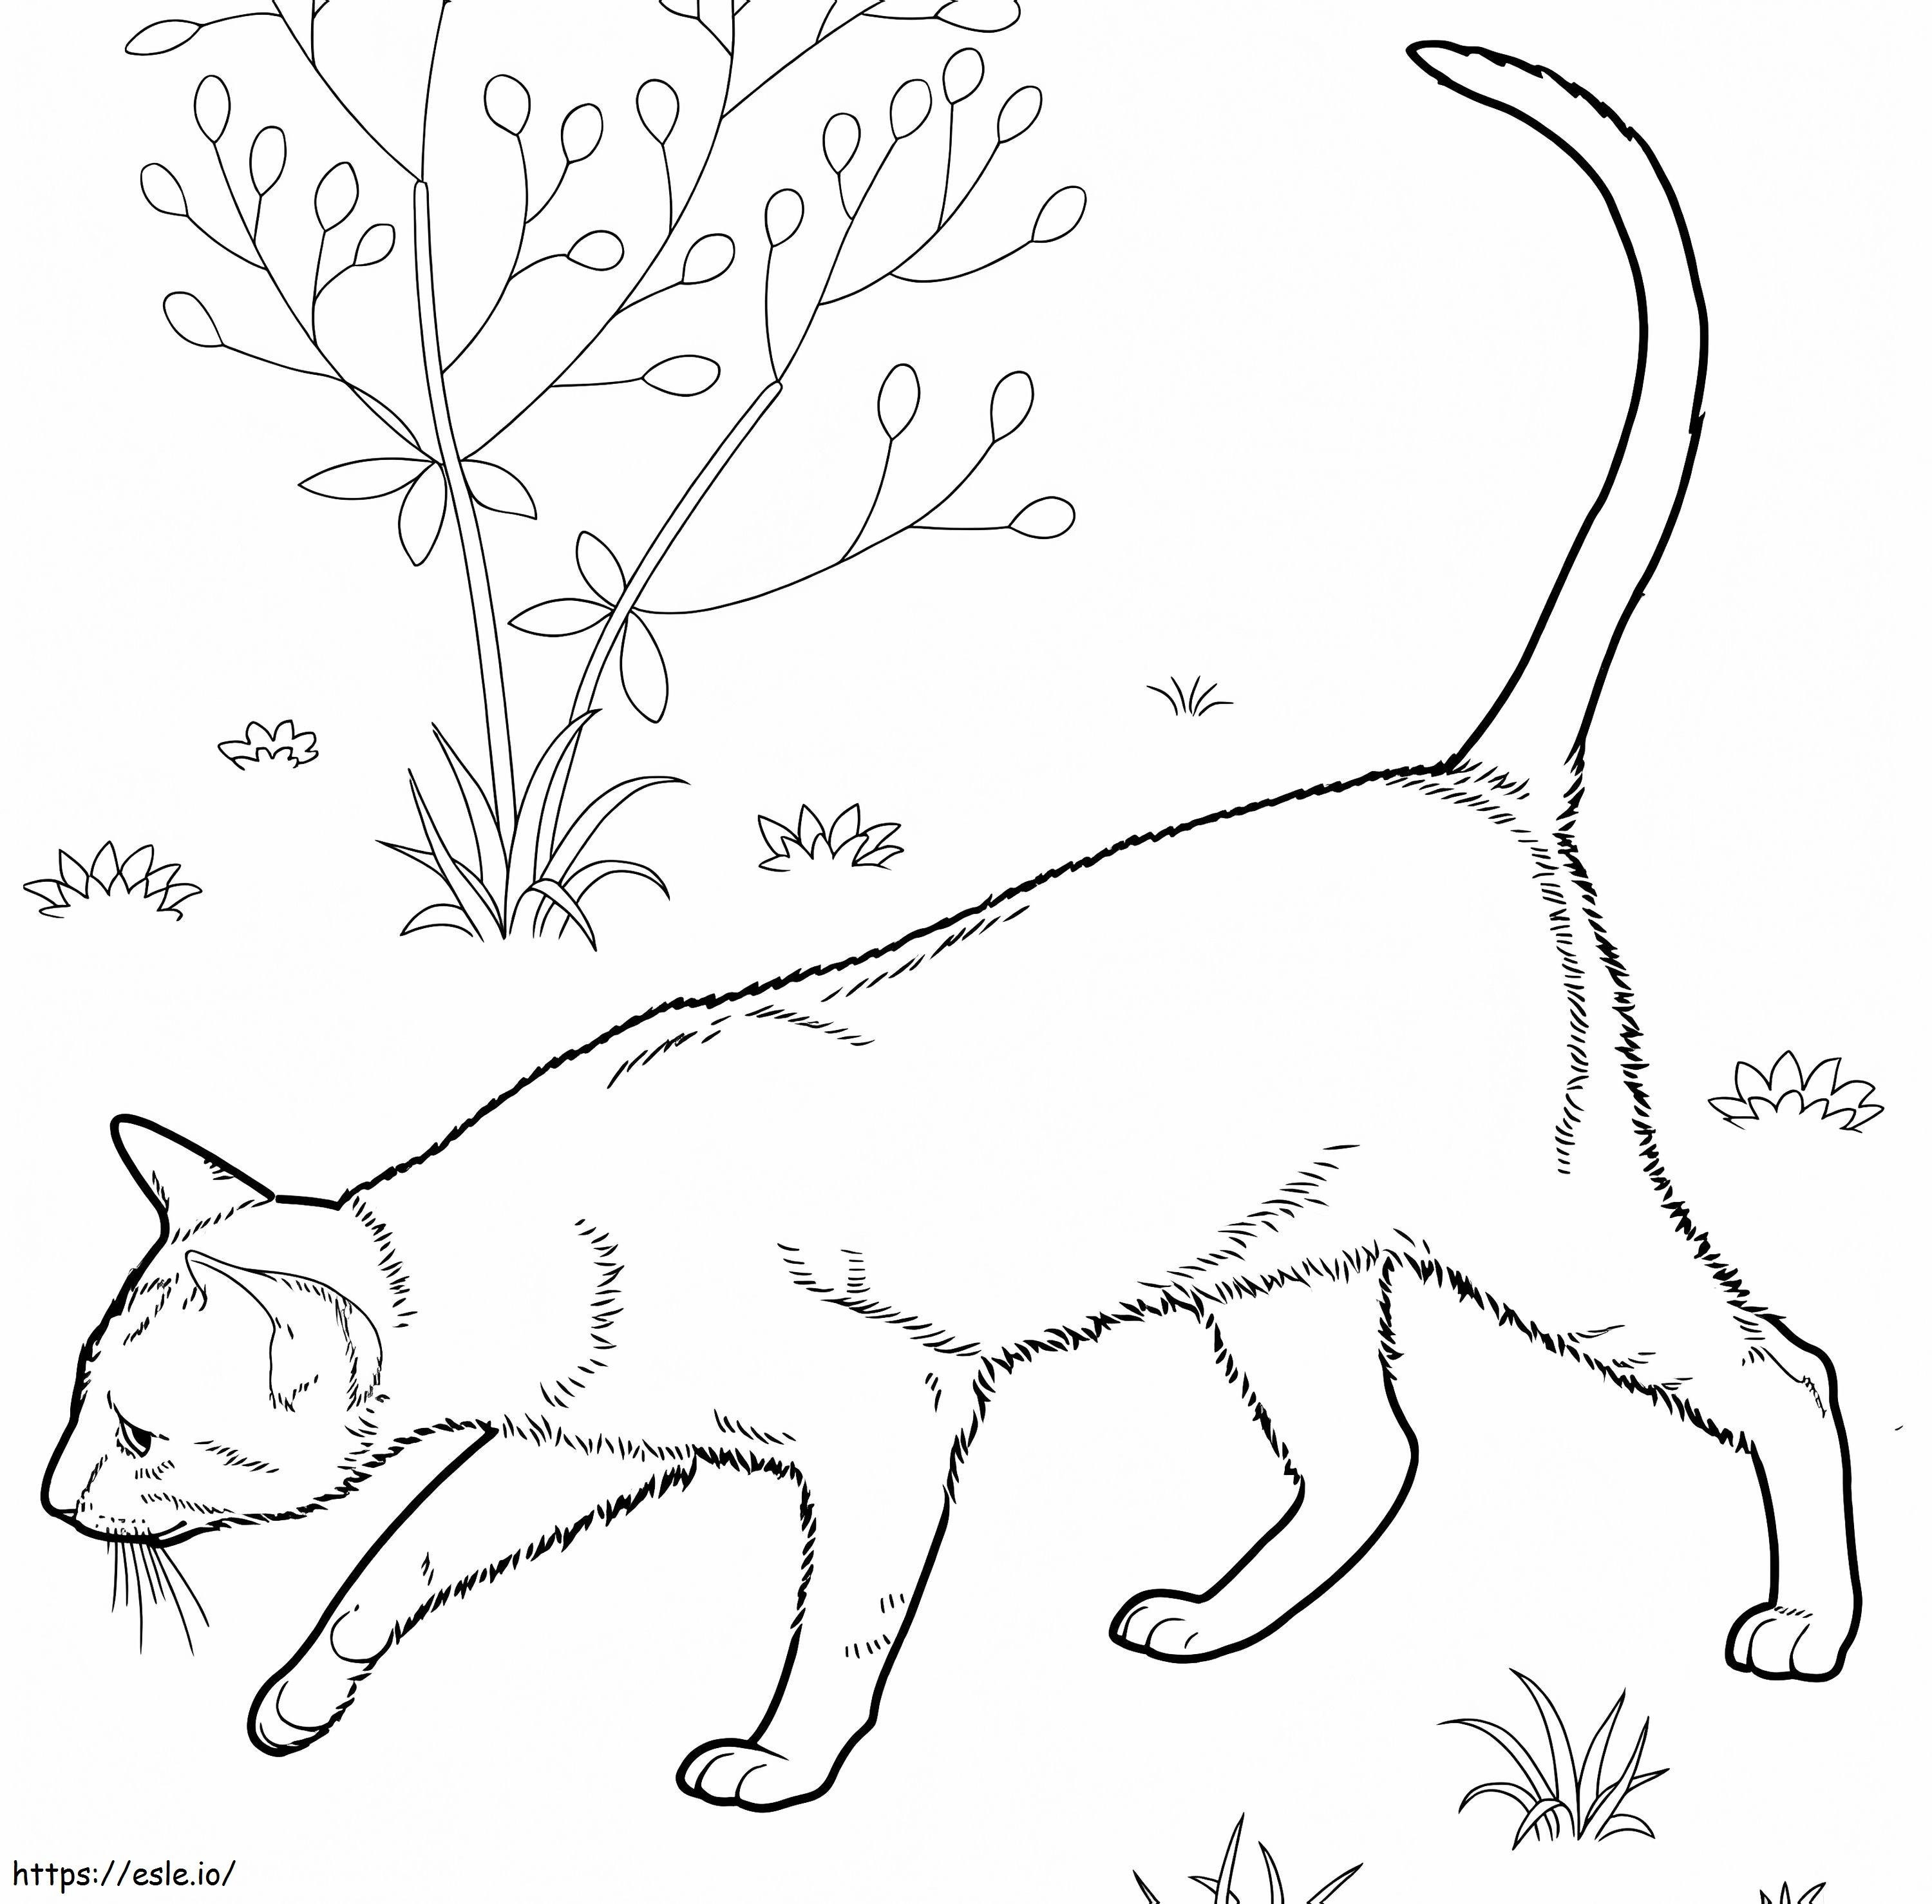 East Shorthair Cat coloring page